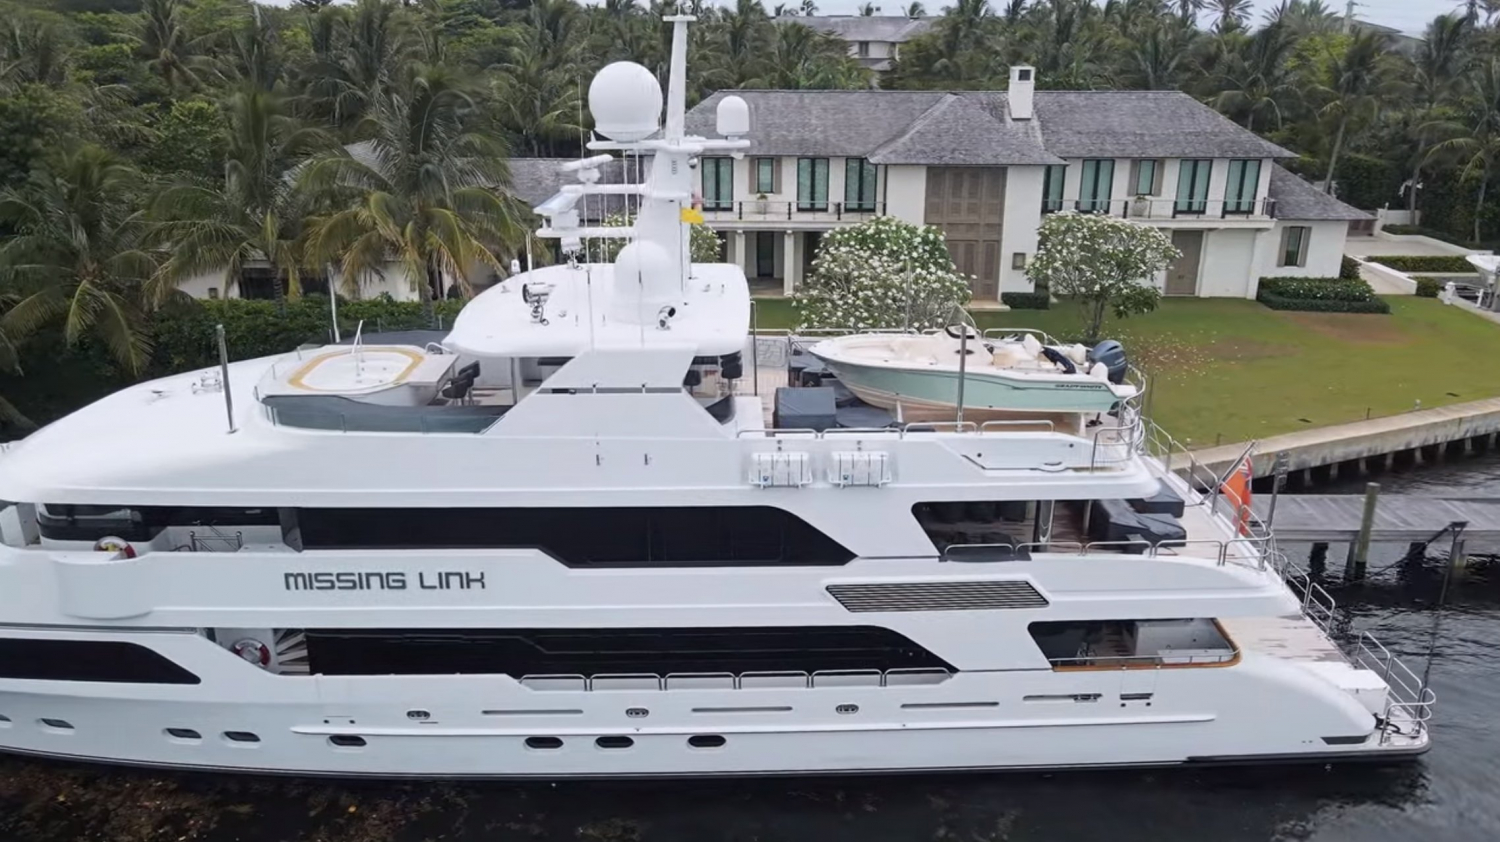 who owns the missing link yacht